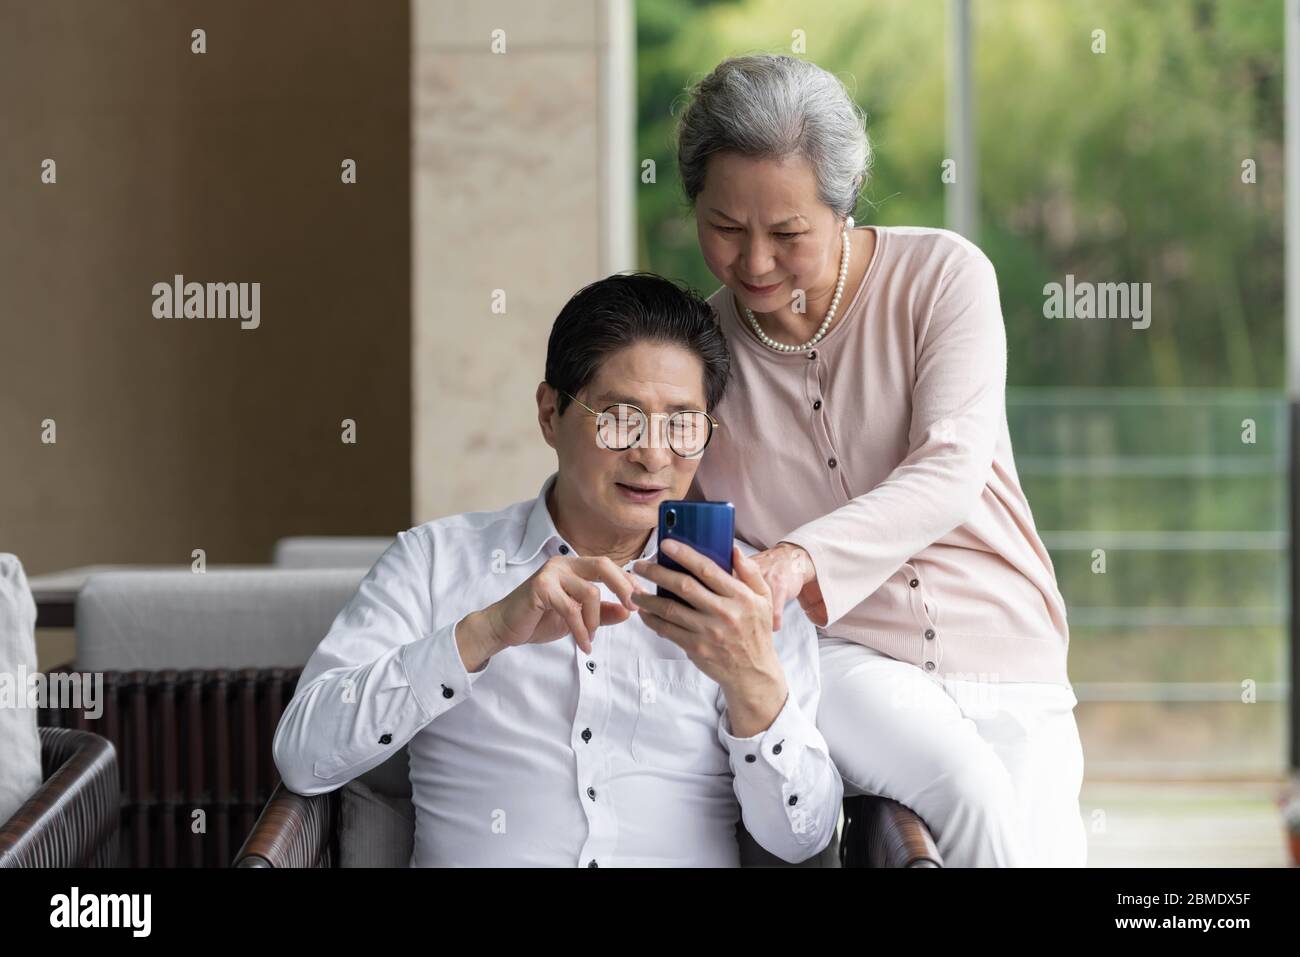 An Asian elderly couple sitting on an outdoor chair Stock Photo